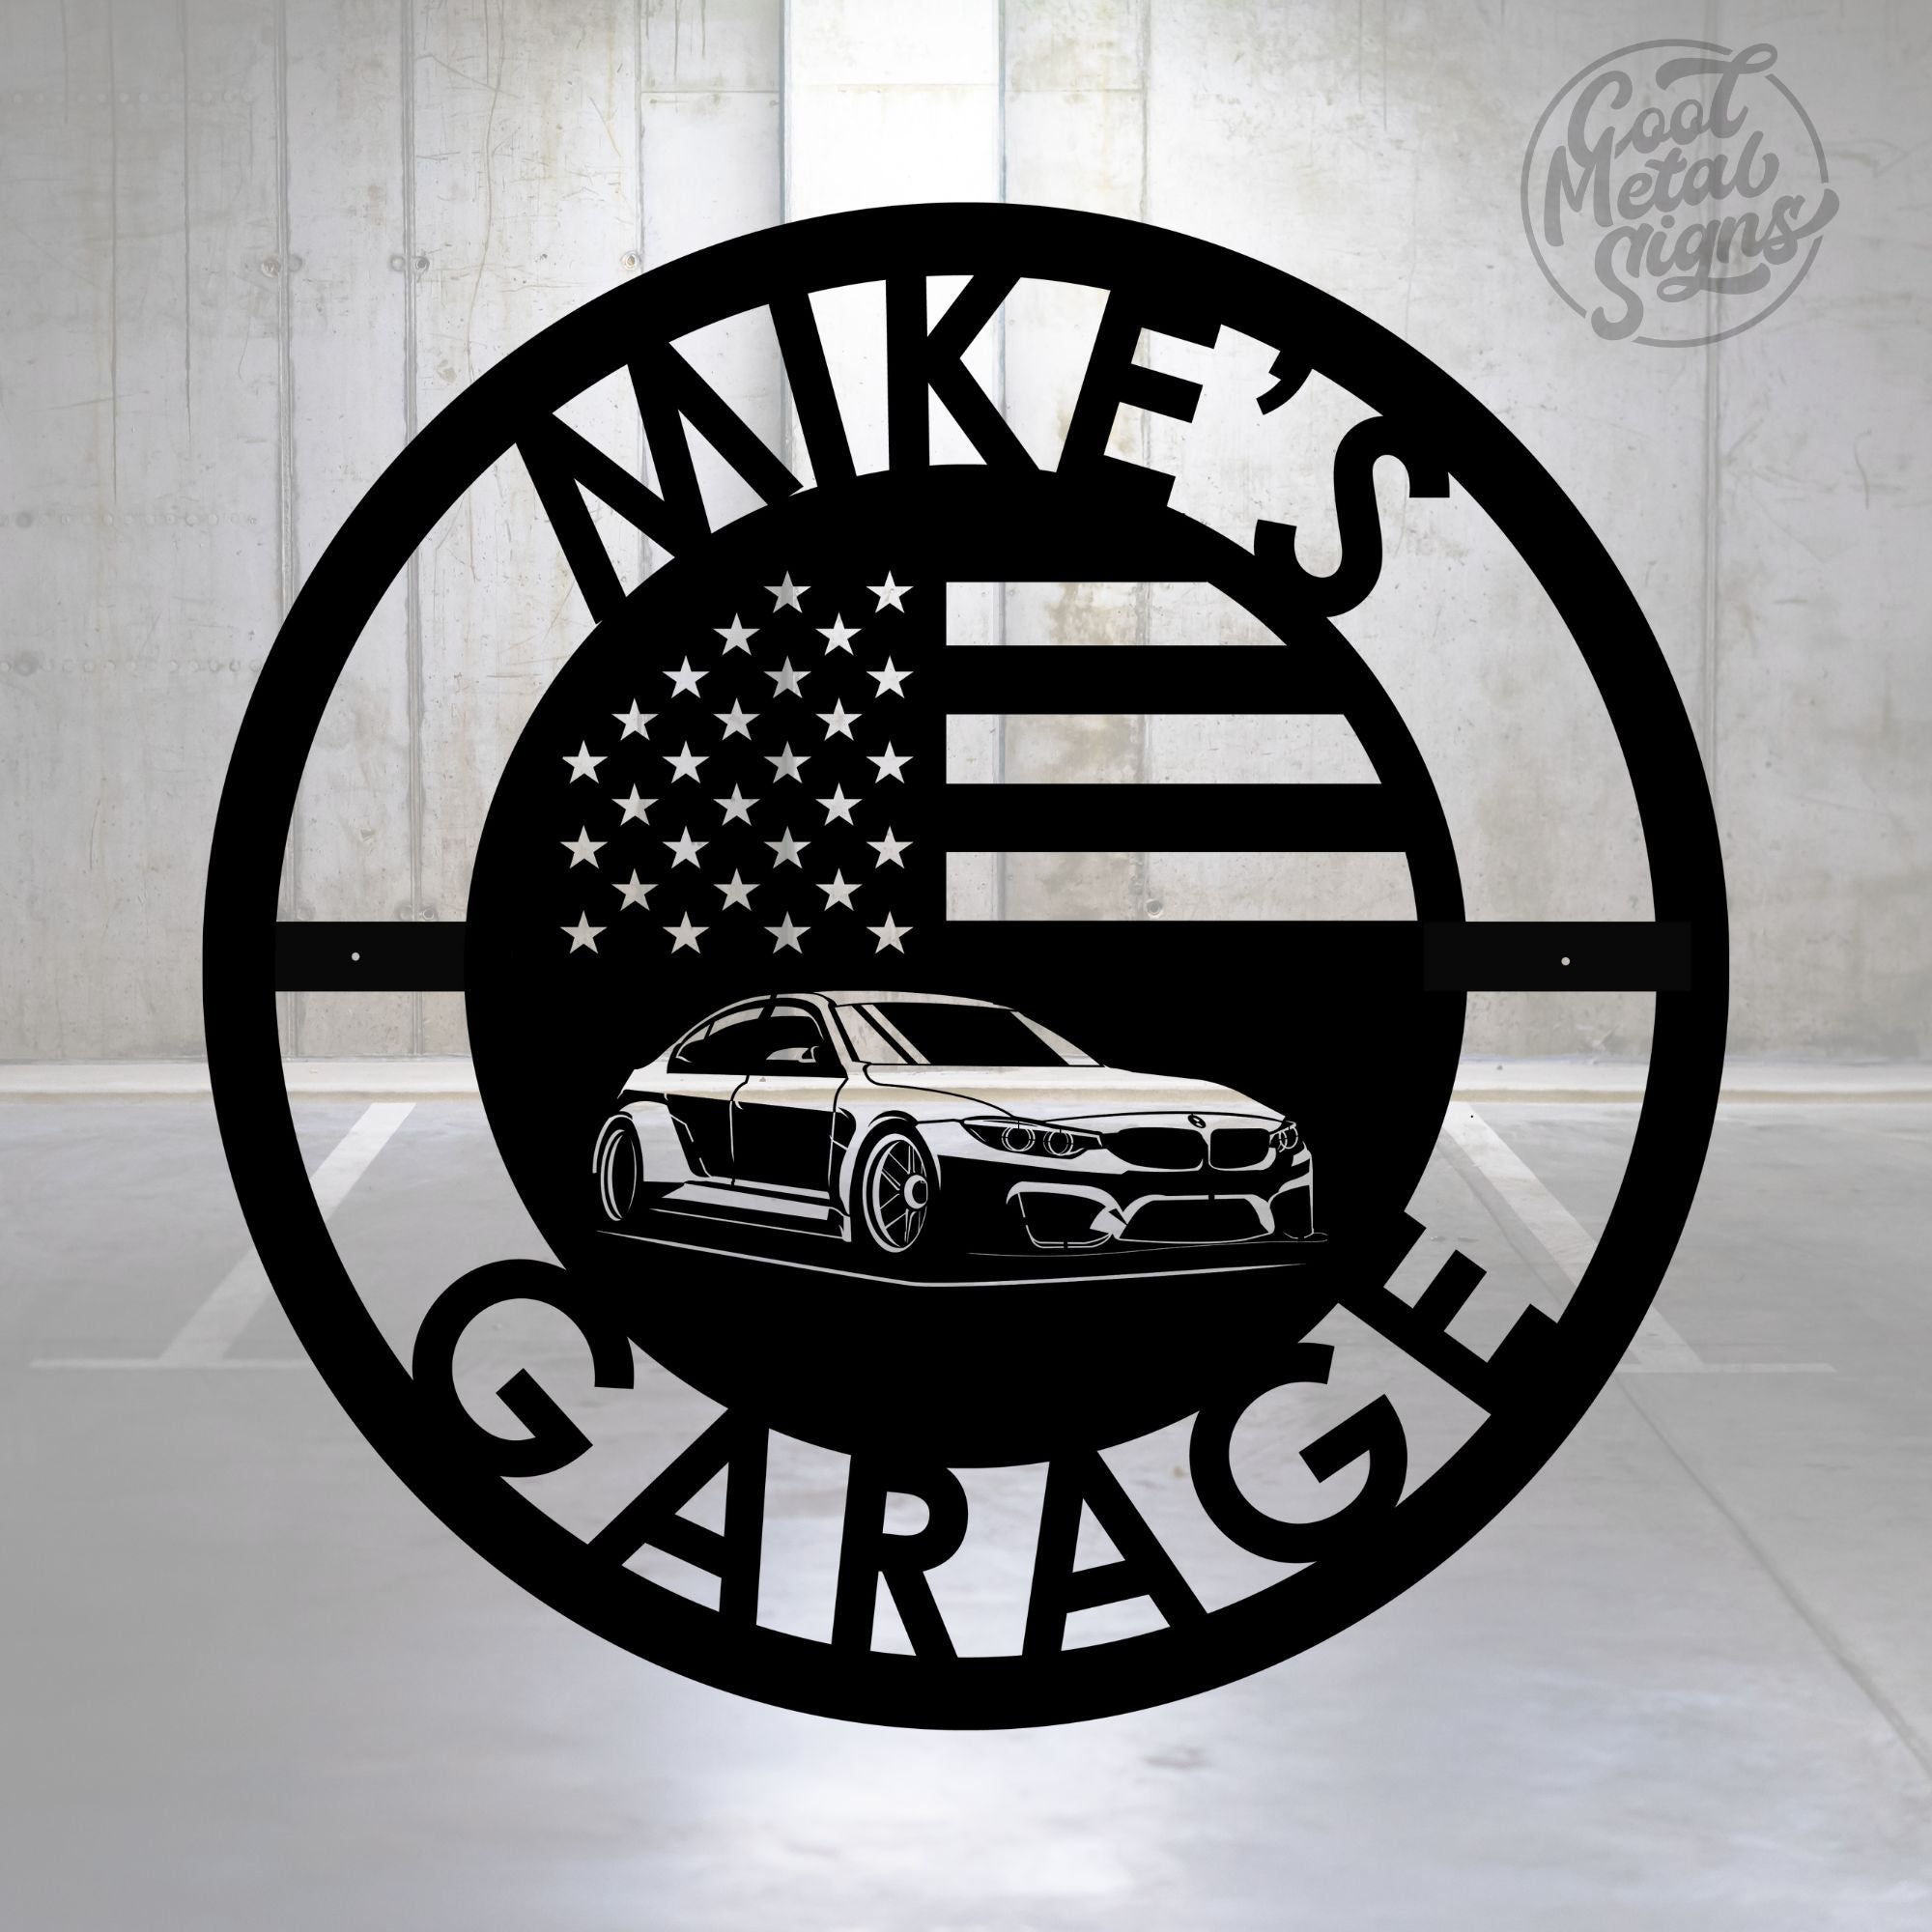 Personalized BMW Garage Sign - Cool Metal Signs